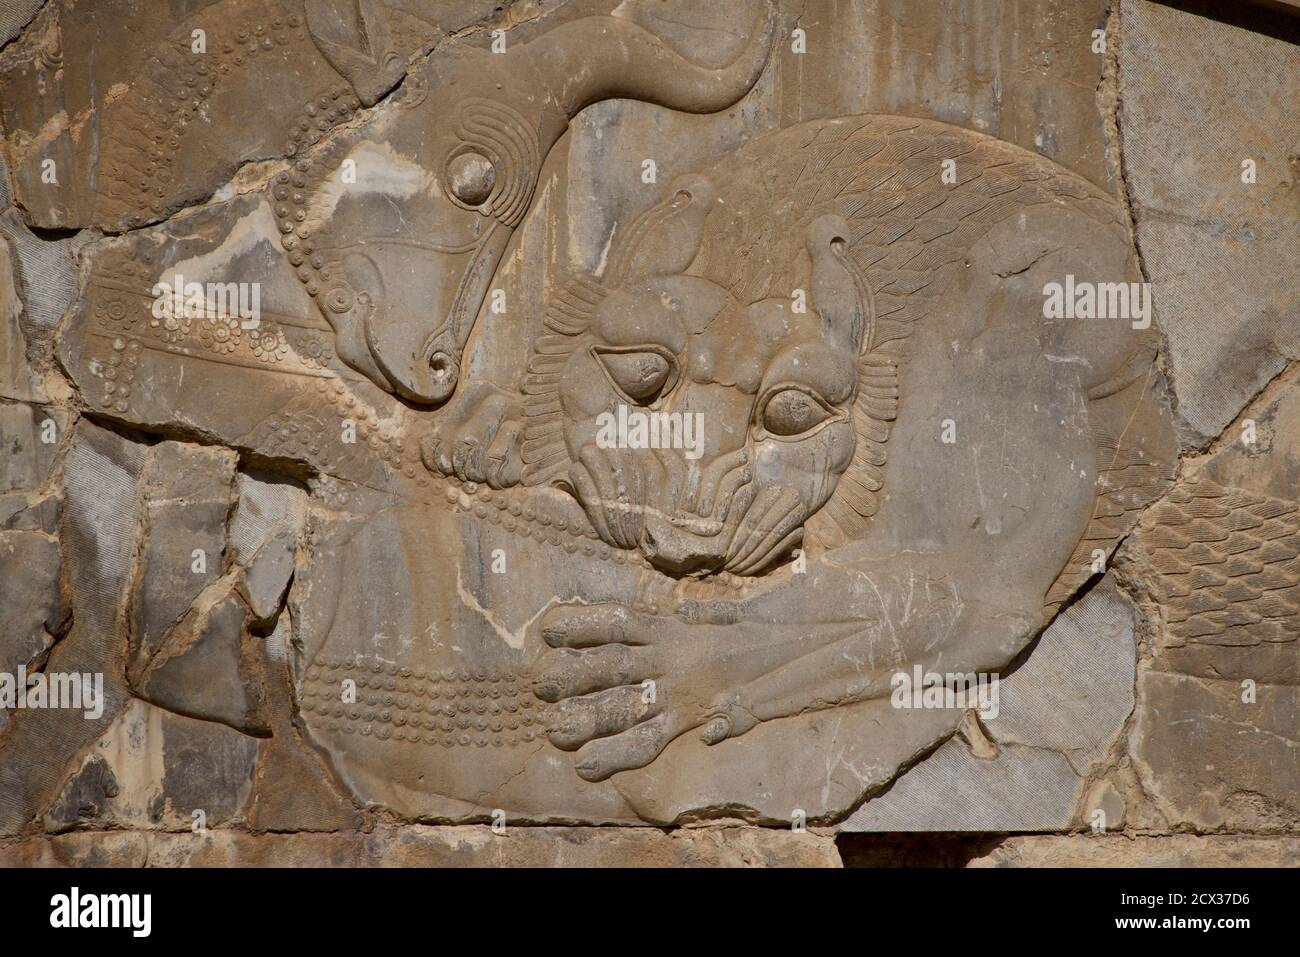 Lion biting the bull. Relief depicting the symbolic coming of spring and the Nowruz festivity, through lion (sun) feasting on the bull (earth); Persepolis, Iran Stock Photo